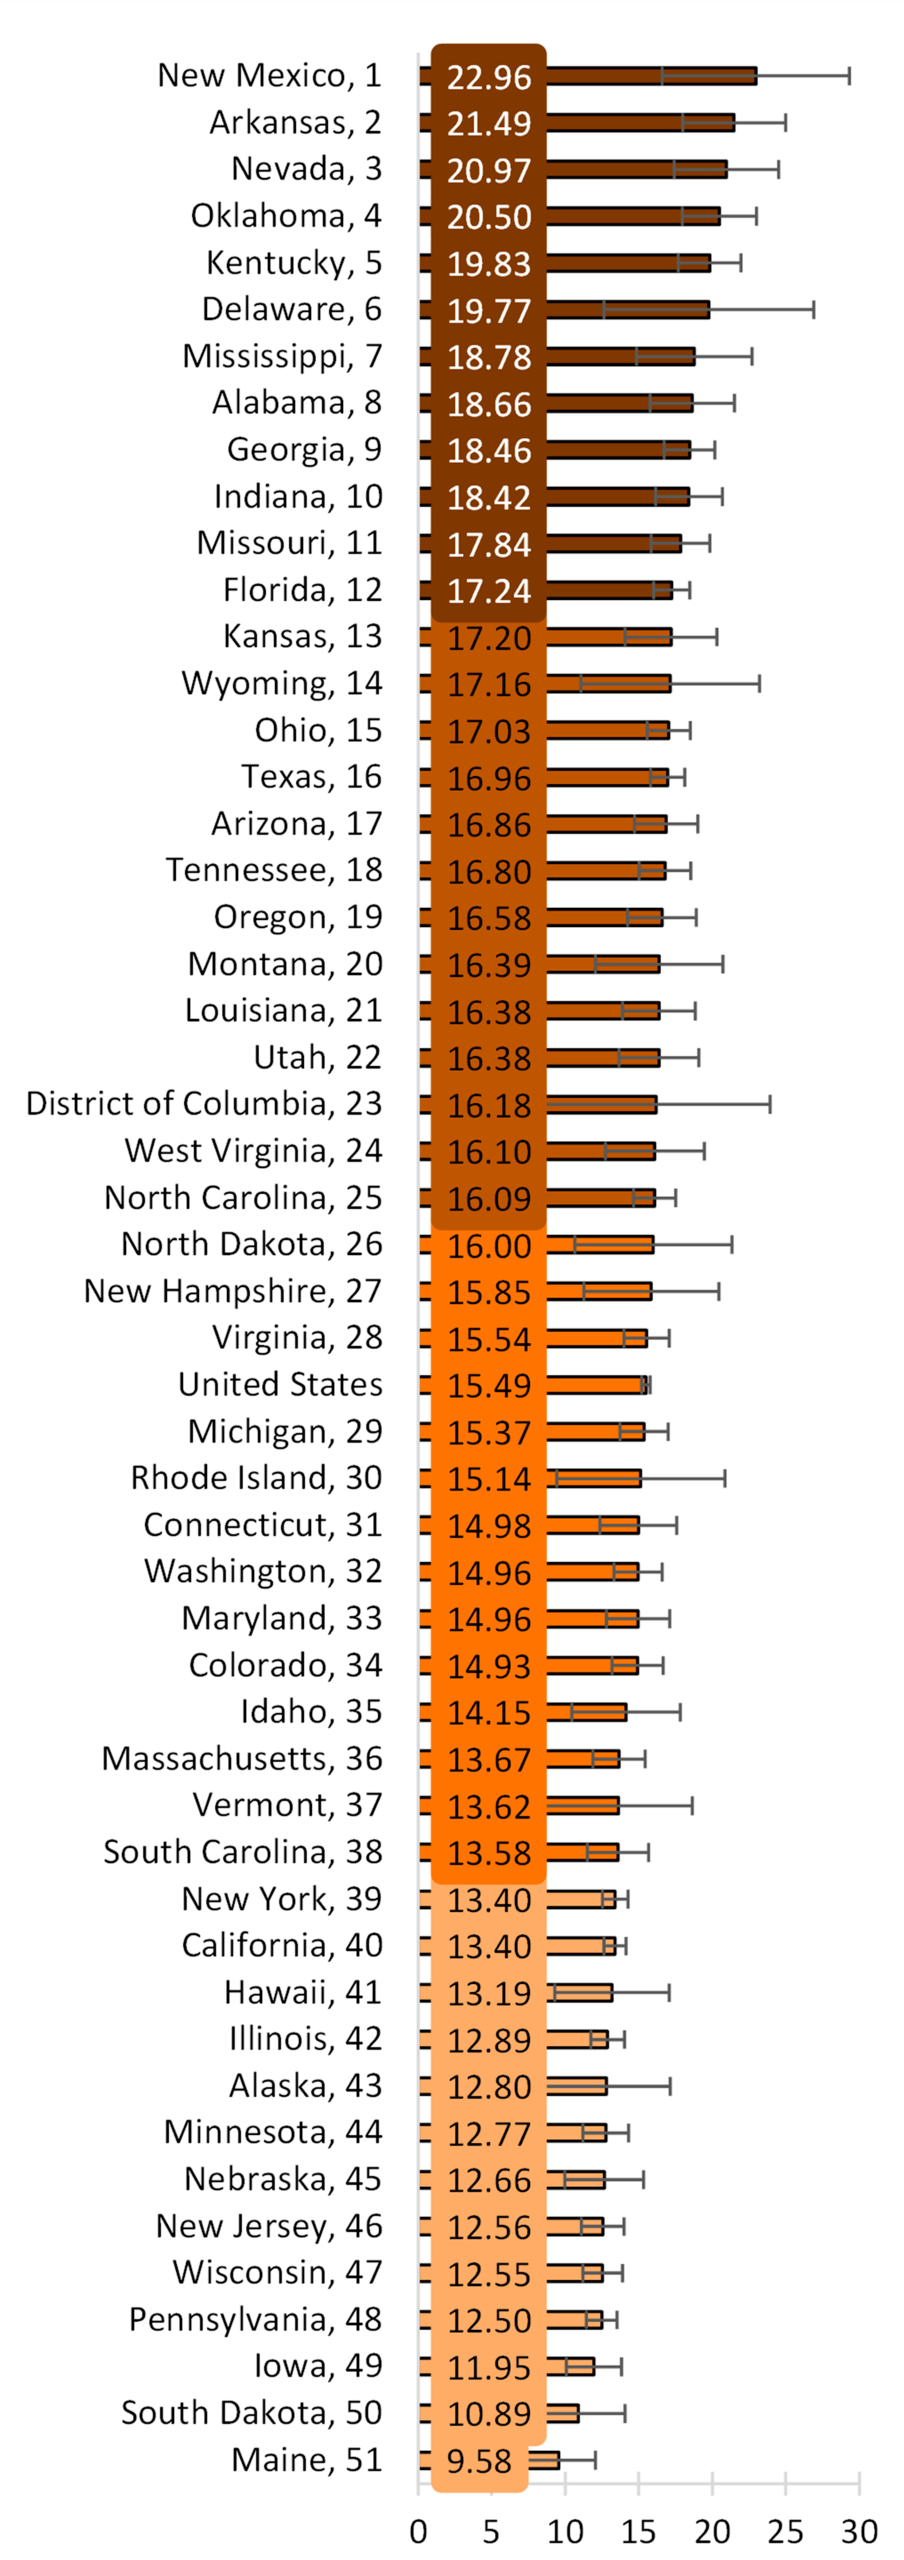 shades of orange table showing state variation in adjusted divorce rate per 1k unmarried women aged 15+